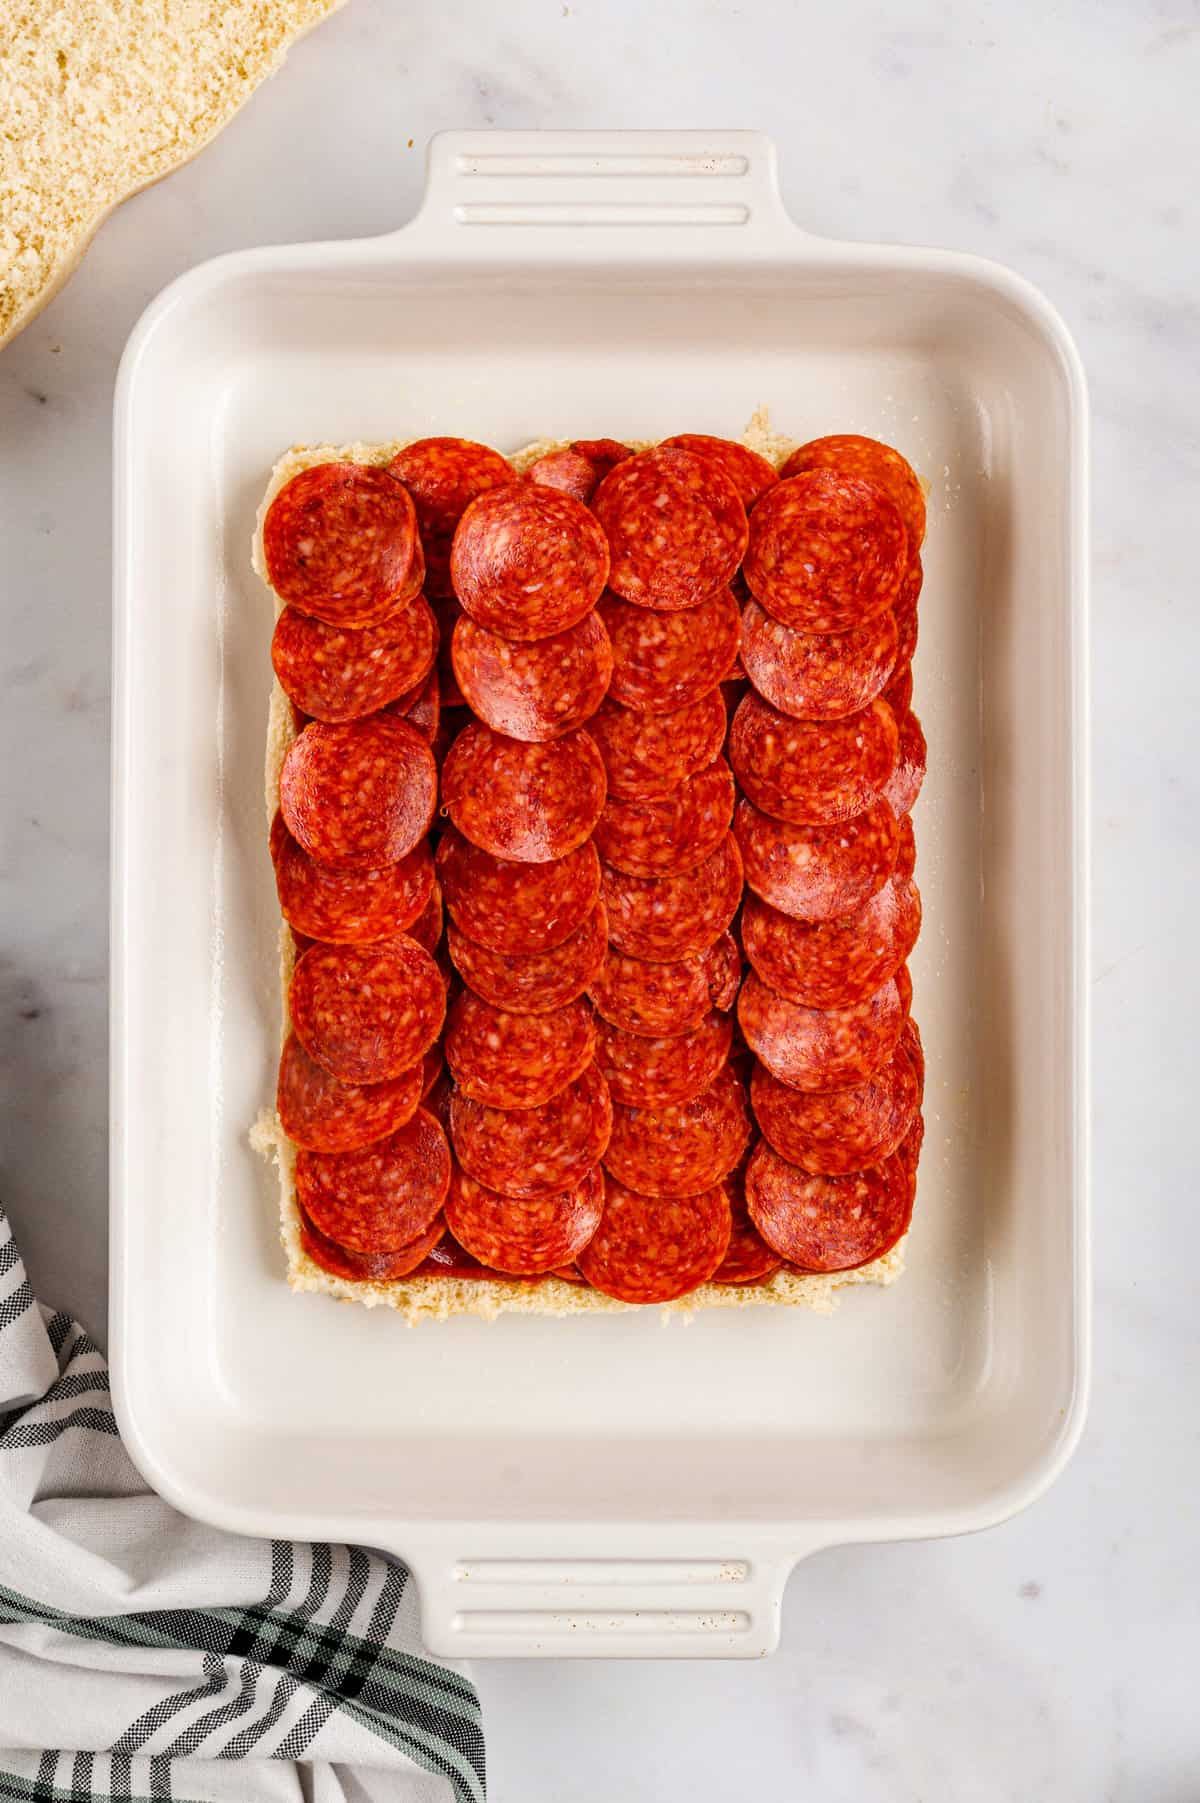 Arranging pepporoni slices atop pizza sauce for Pizza Sliders recipe